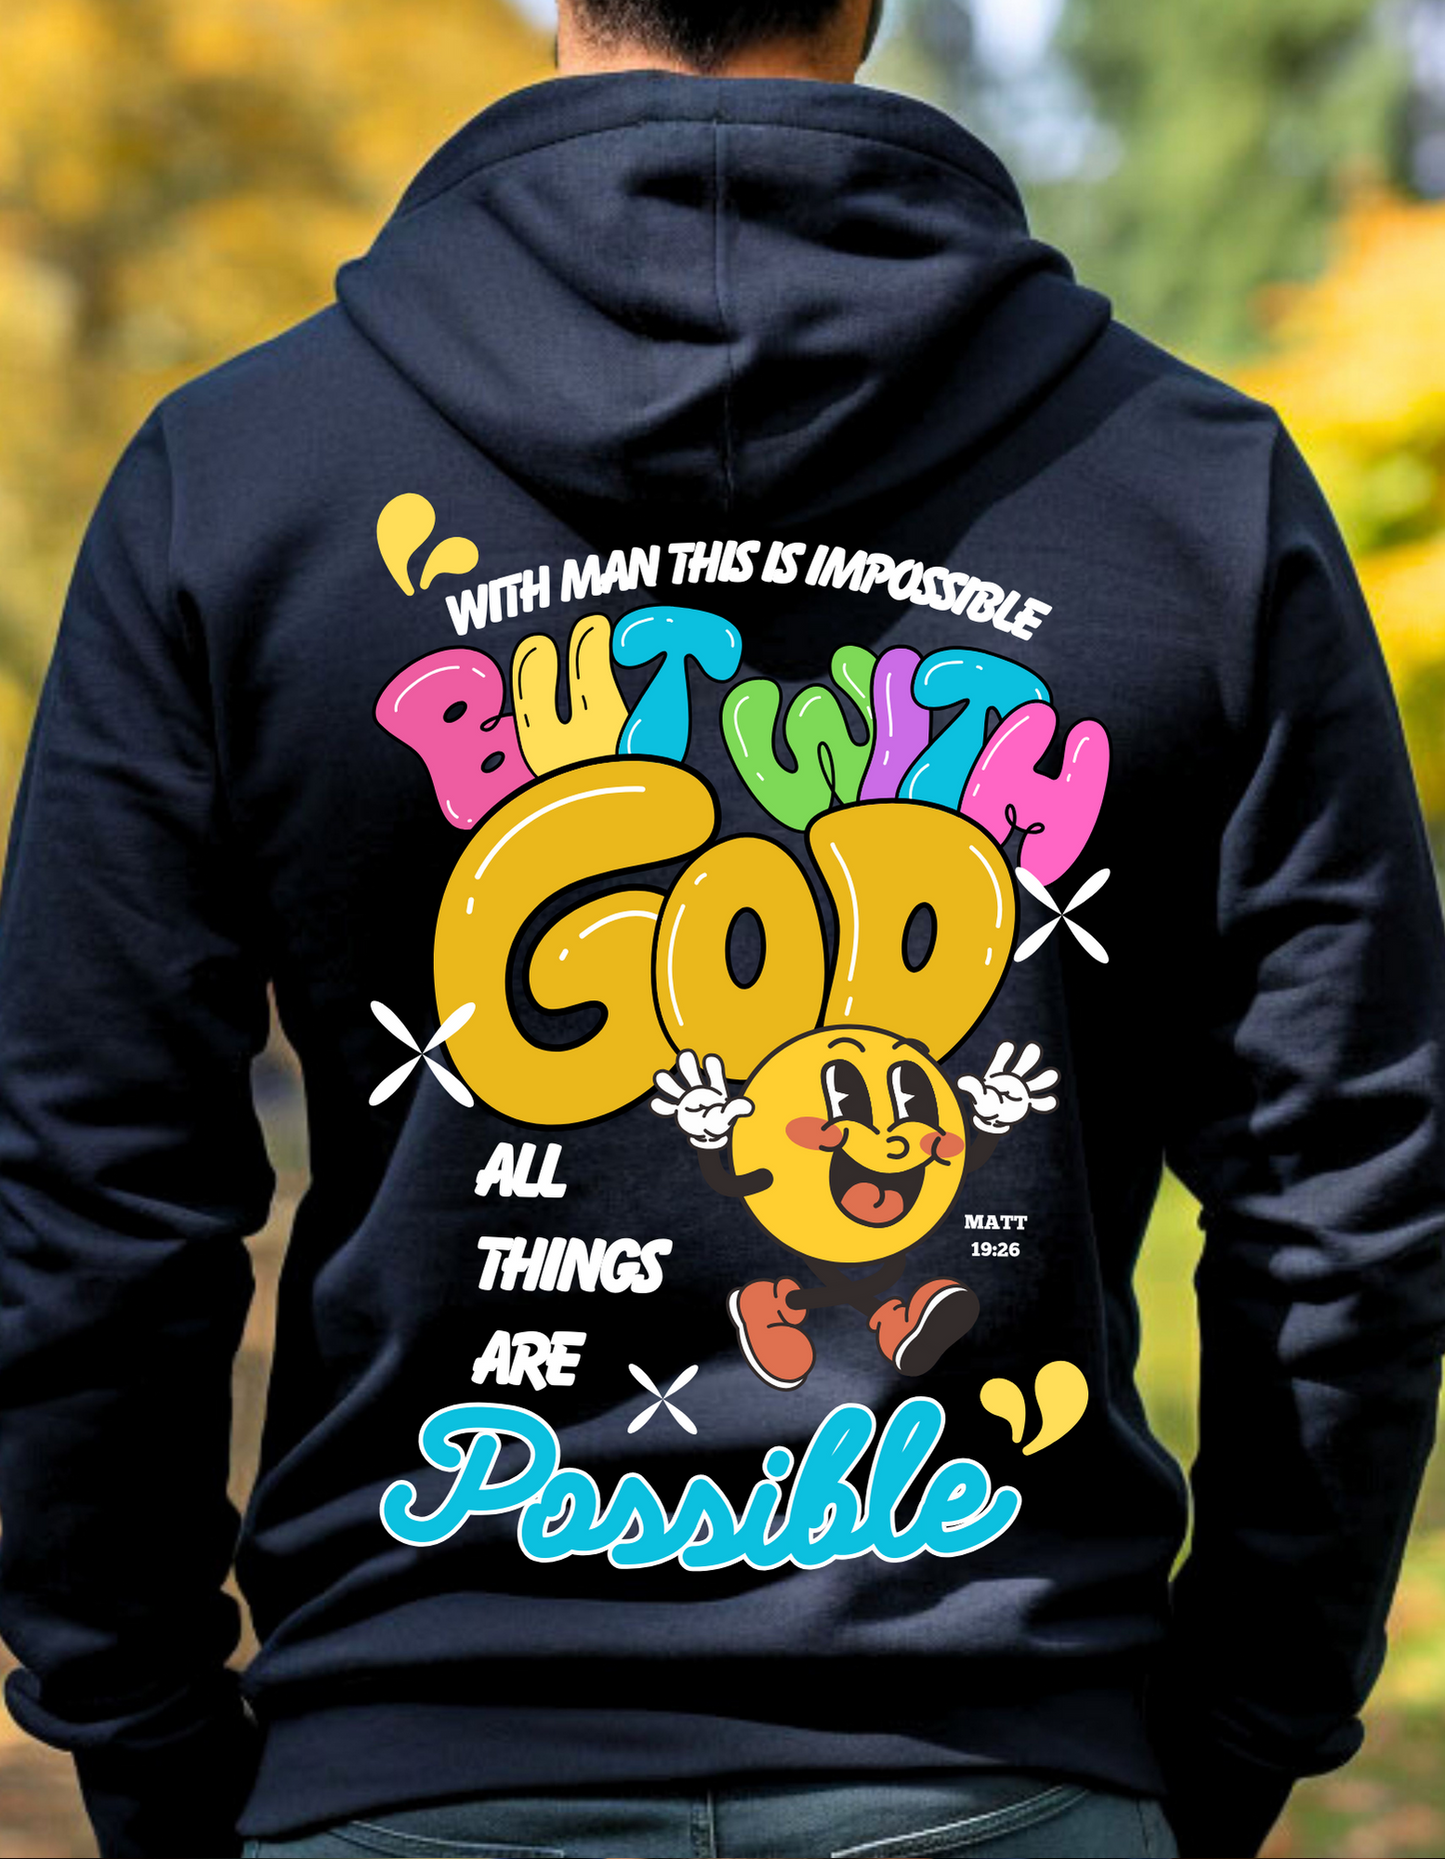 ALL THINGS ARE POSSIBLE SMILE UNISEX HOODIE